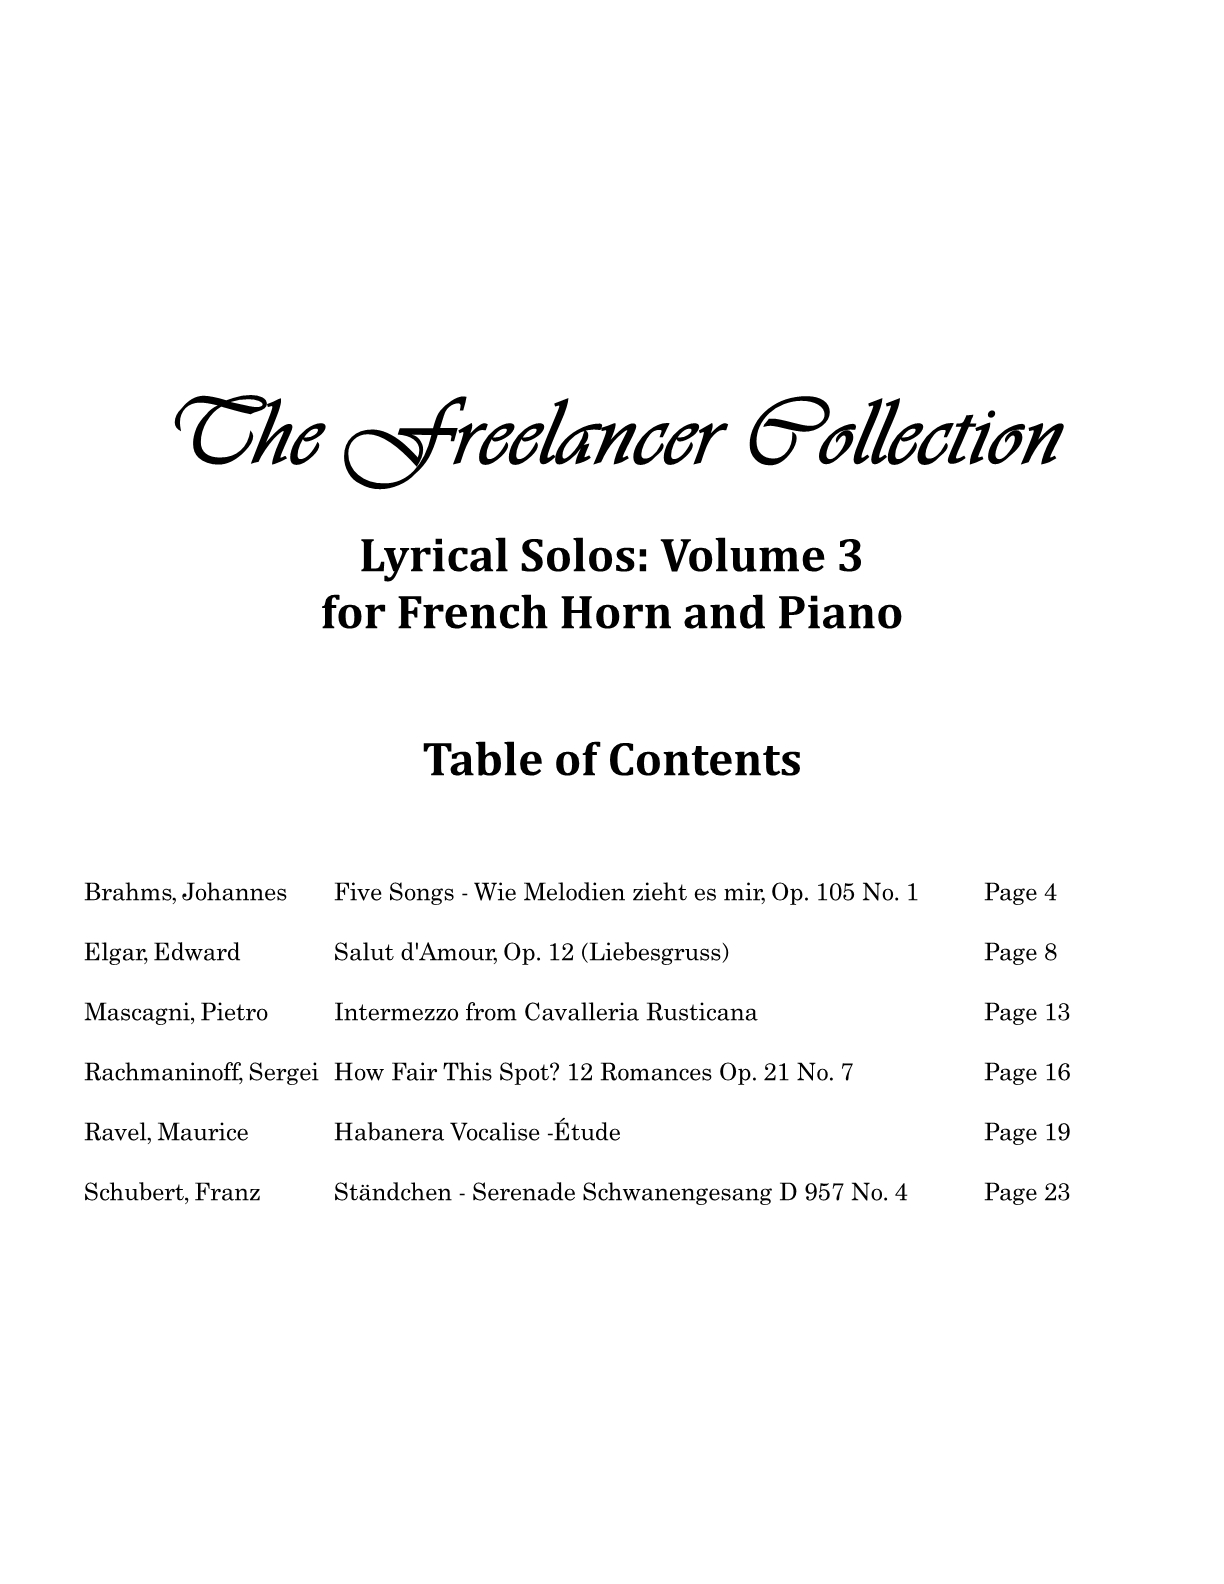 Hepler - Freelancer Collection Lyrical Solos Vol 3 (Hrn & Piano) - Click Image to Close